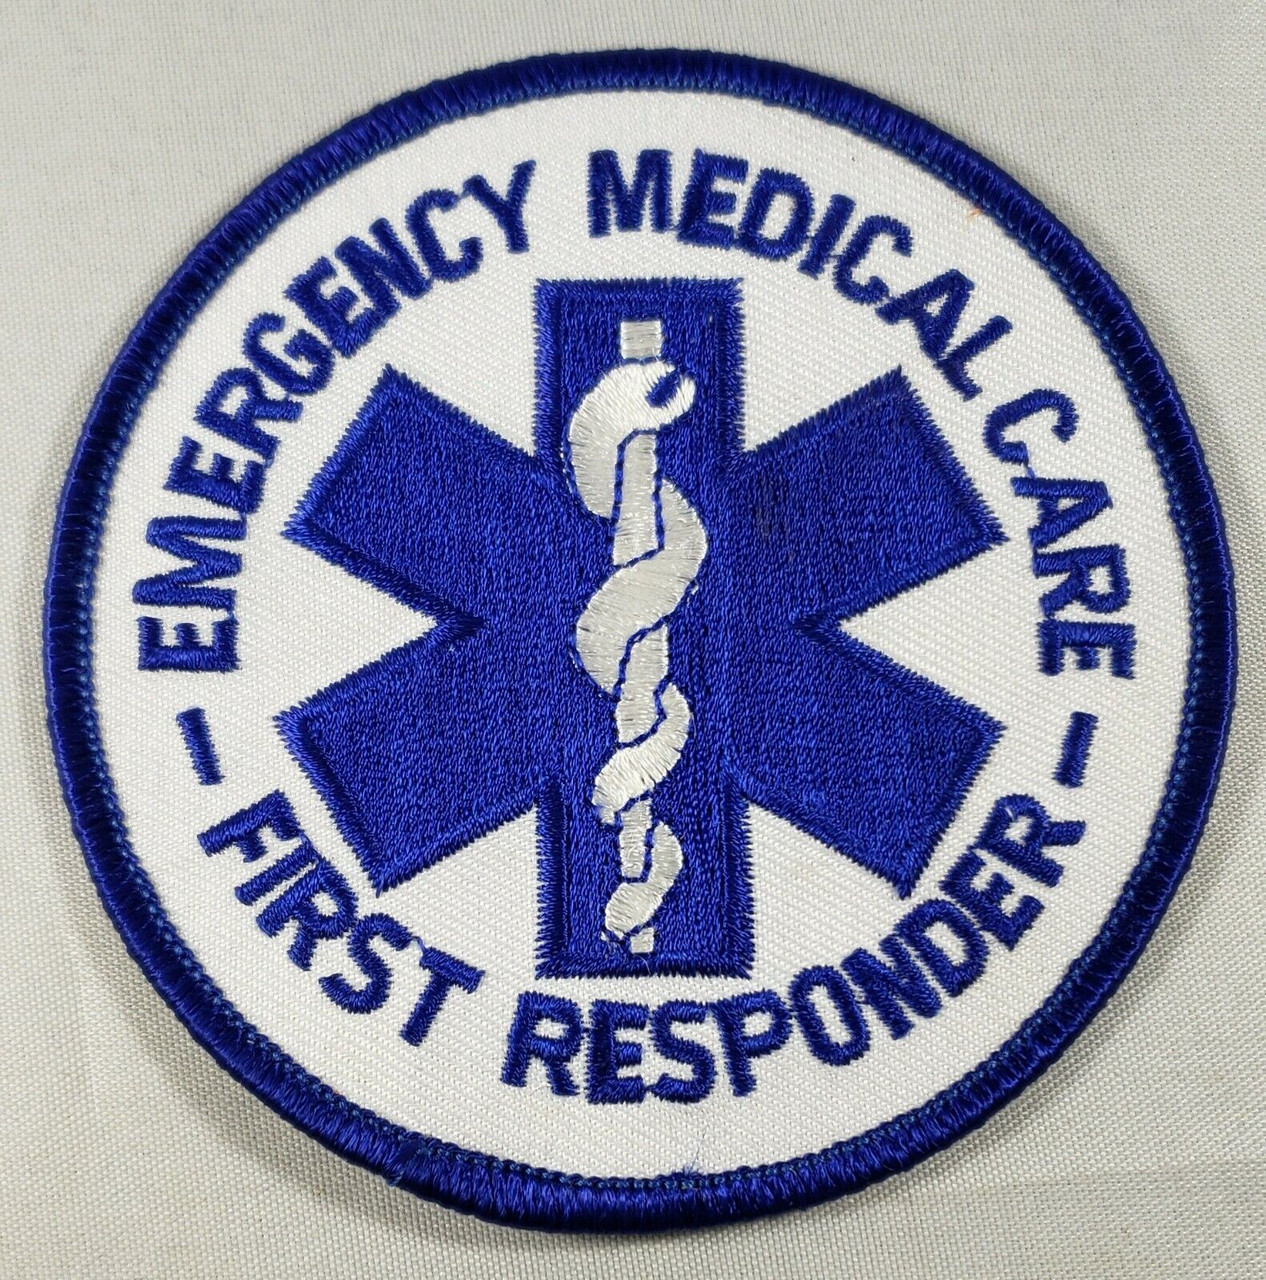 EMERGENCY MEDICAL TECHNICIAN EMT PATCH FIRST 1ST RESPONDER RESCUE PARAMEDIC